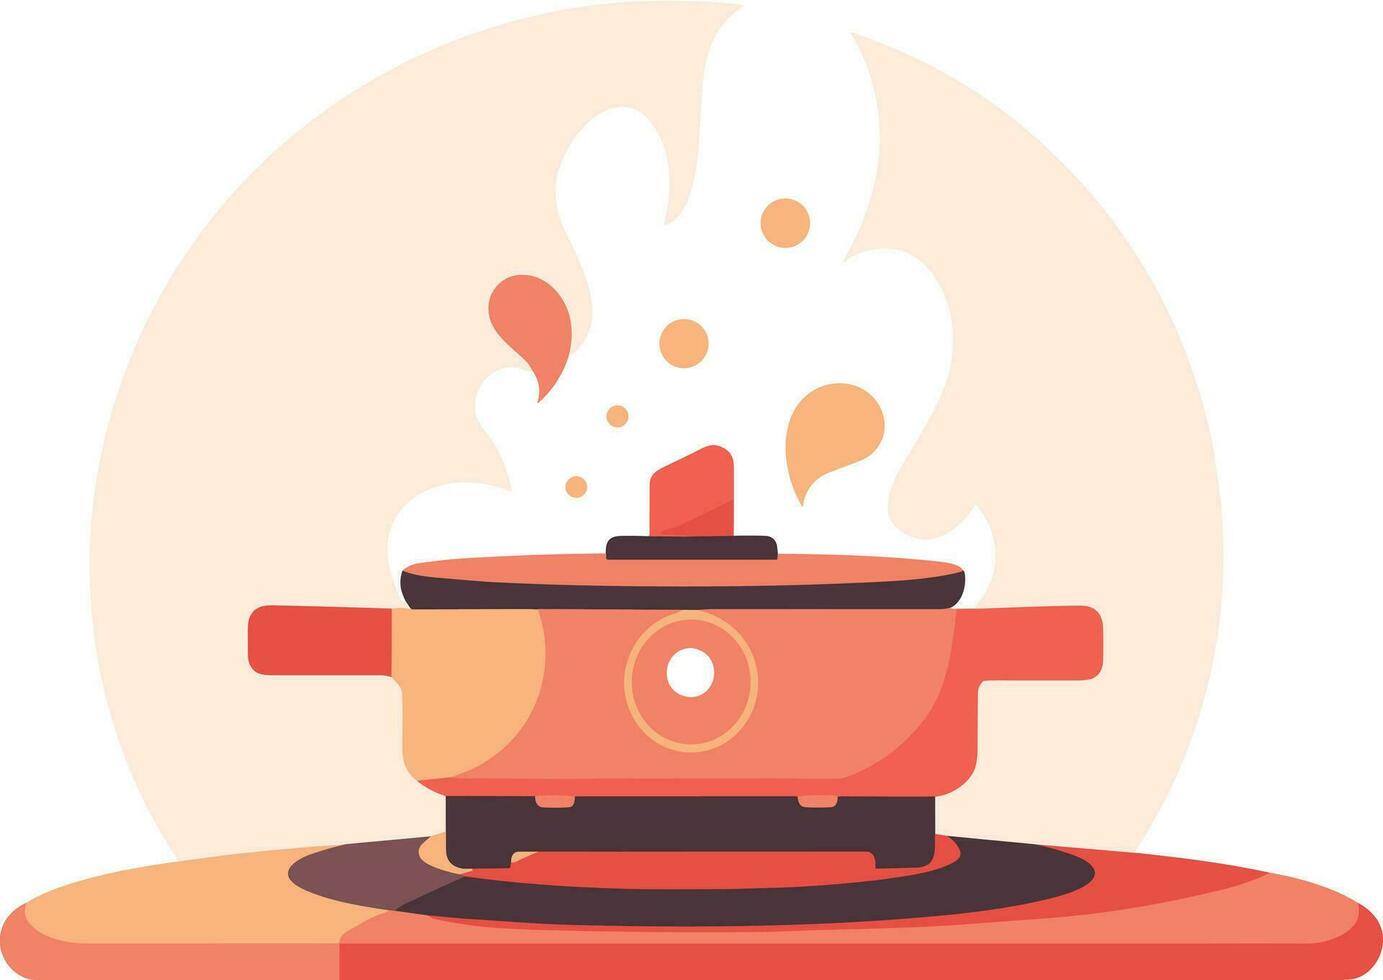 Hand Drawn Oven or pan in a restaurant in flat style vector